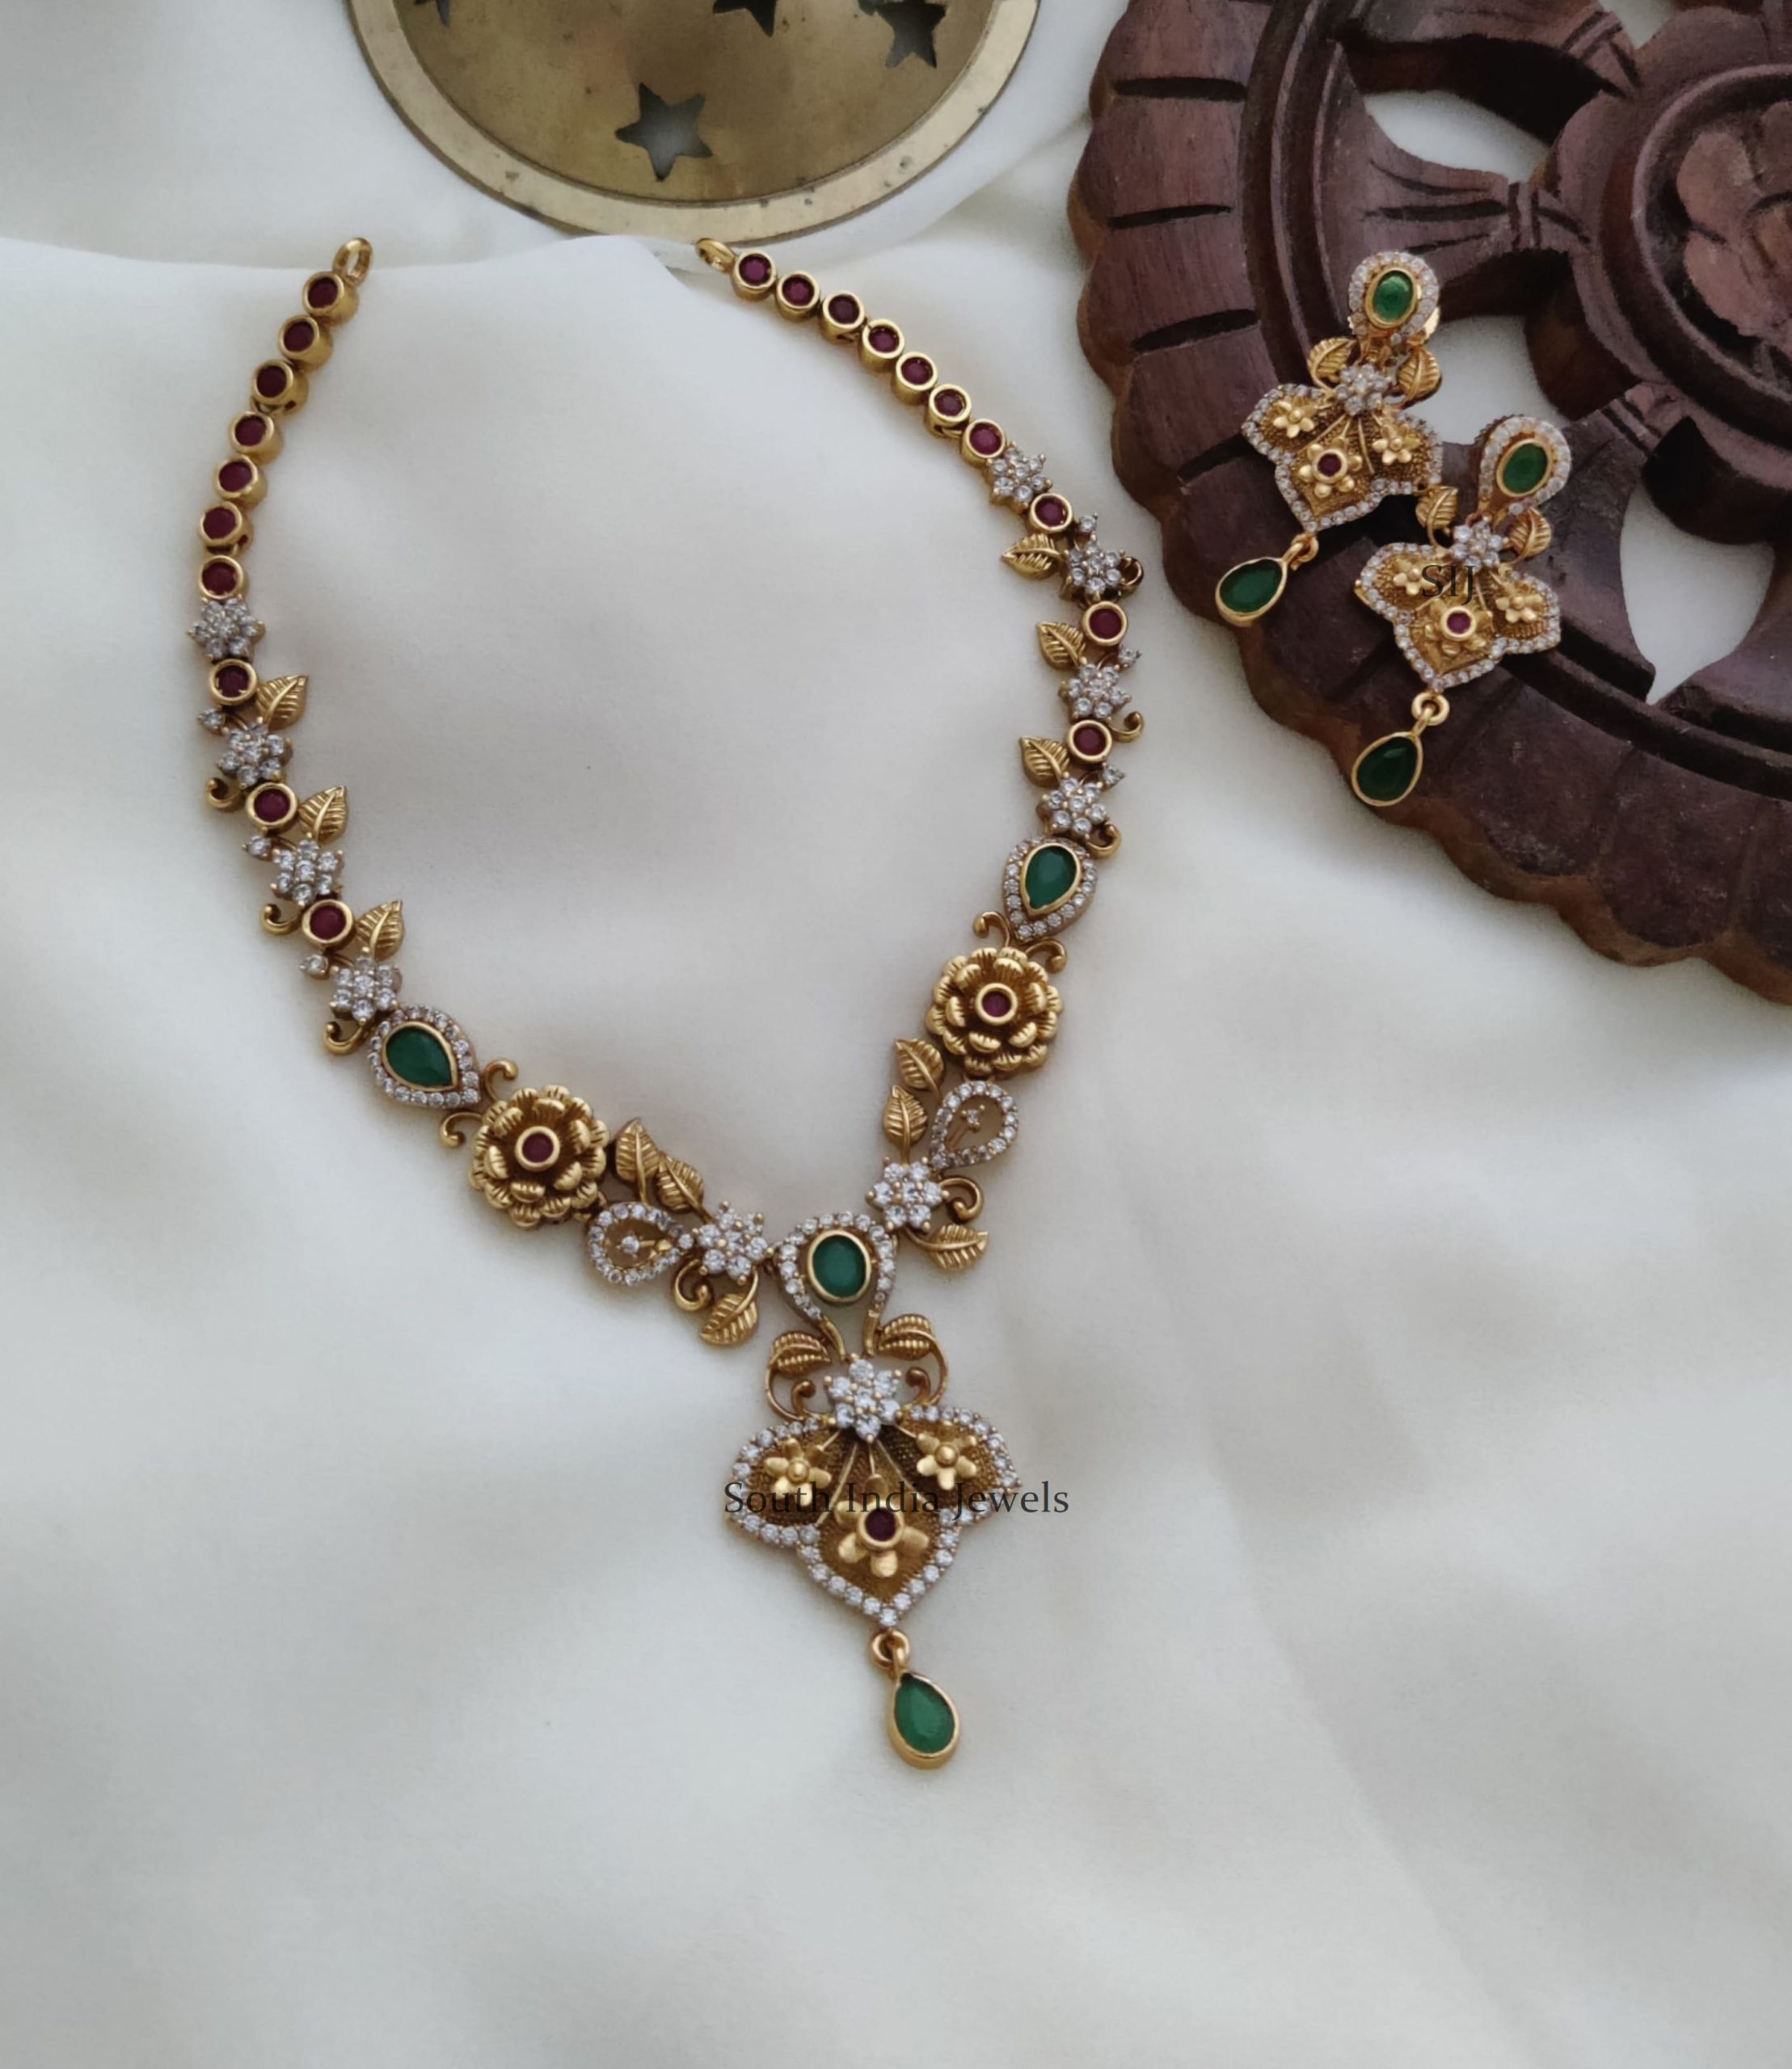 Antique Design Necklace -South India Jewels Online Stores.